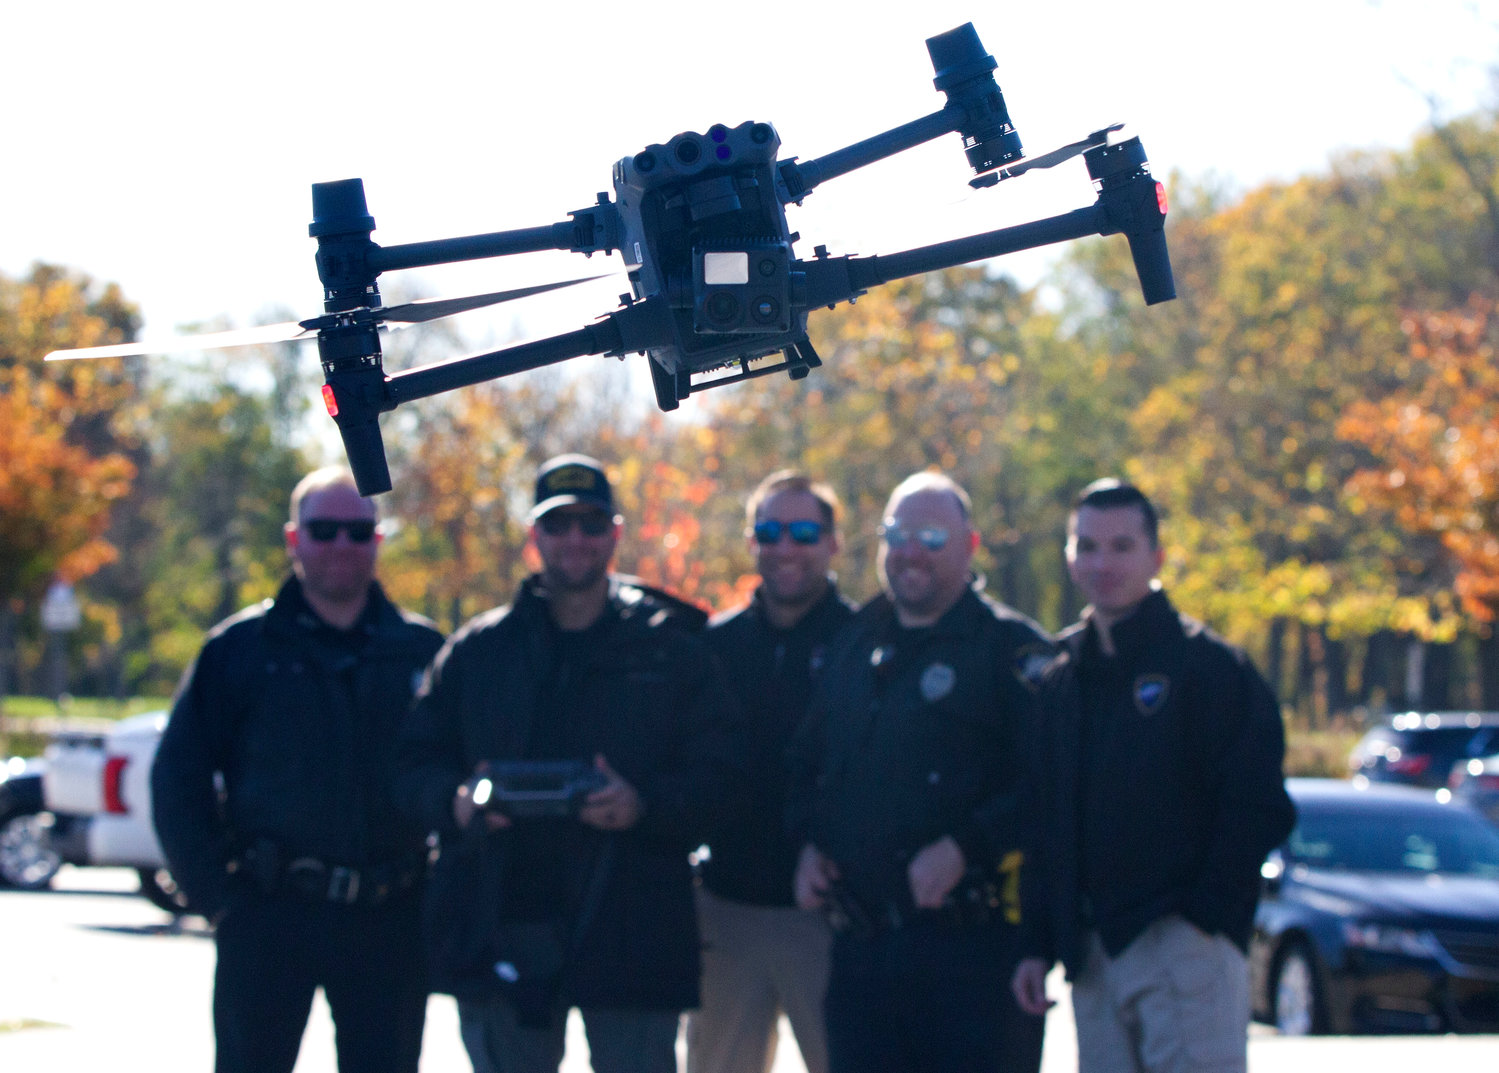 Bristol police officers from left, Mike Kelly, Det. John Nappi, Sgt. Tim Gallison and Tyler Carreiro learn to fly a drone that will be used for police work during the parade and other events.